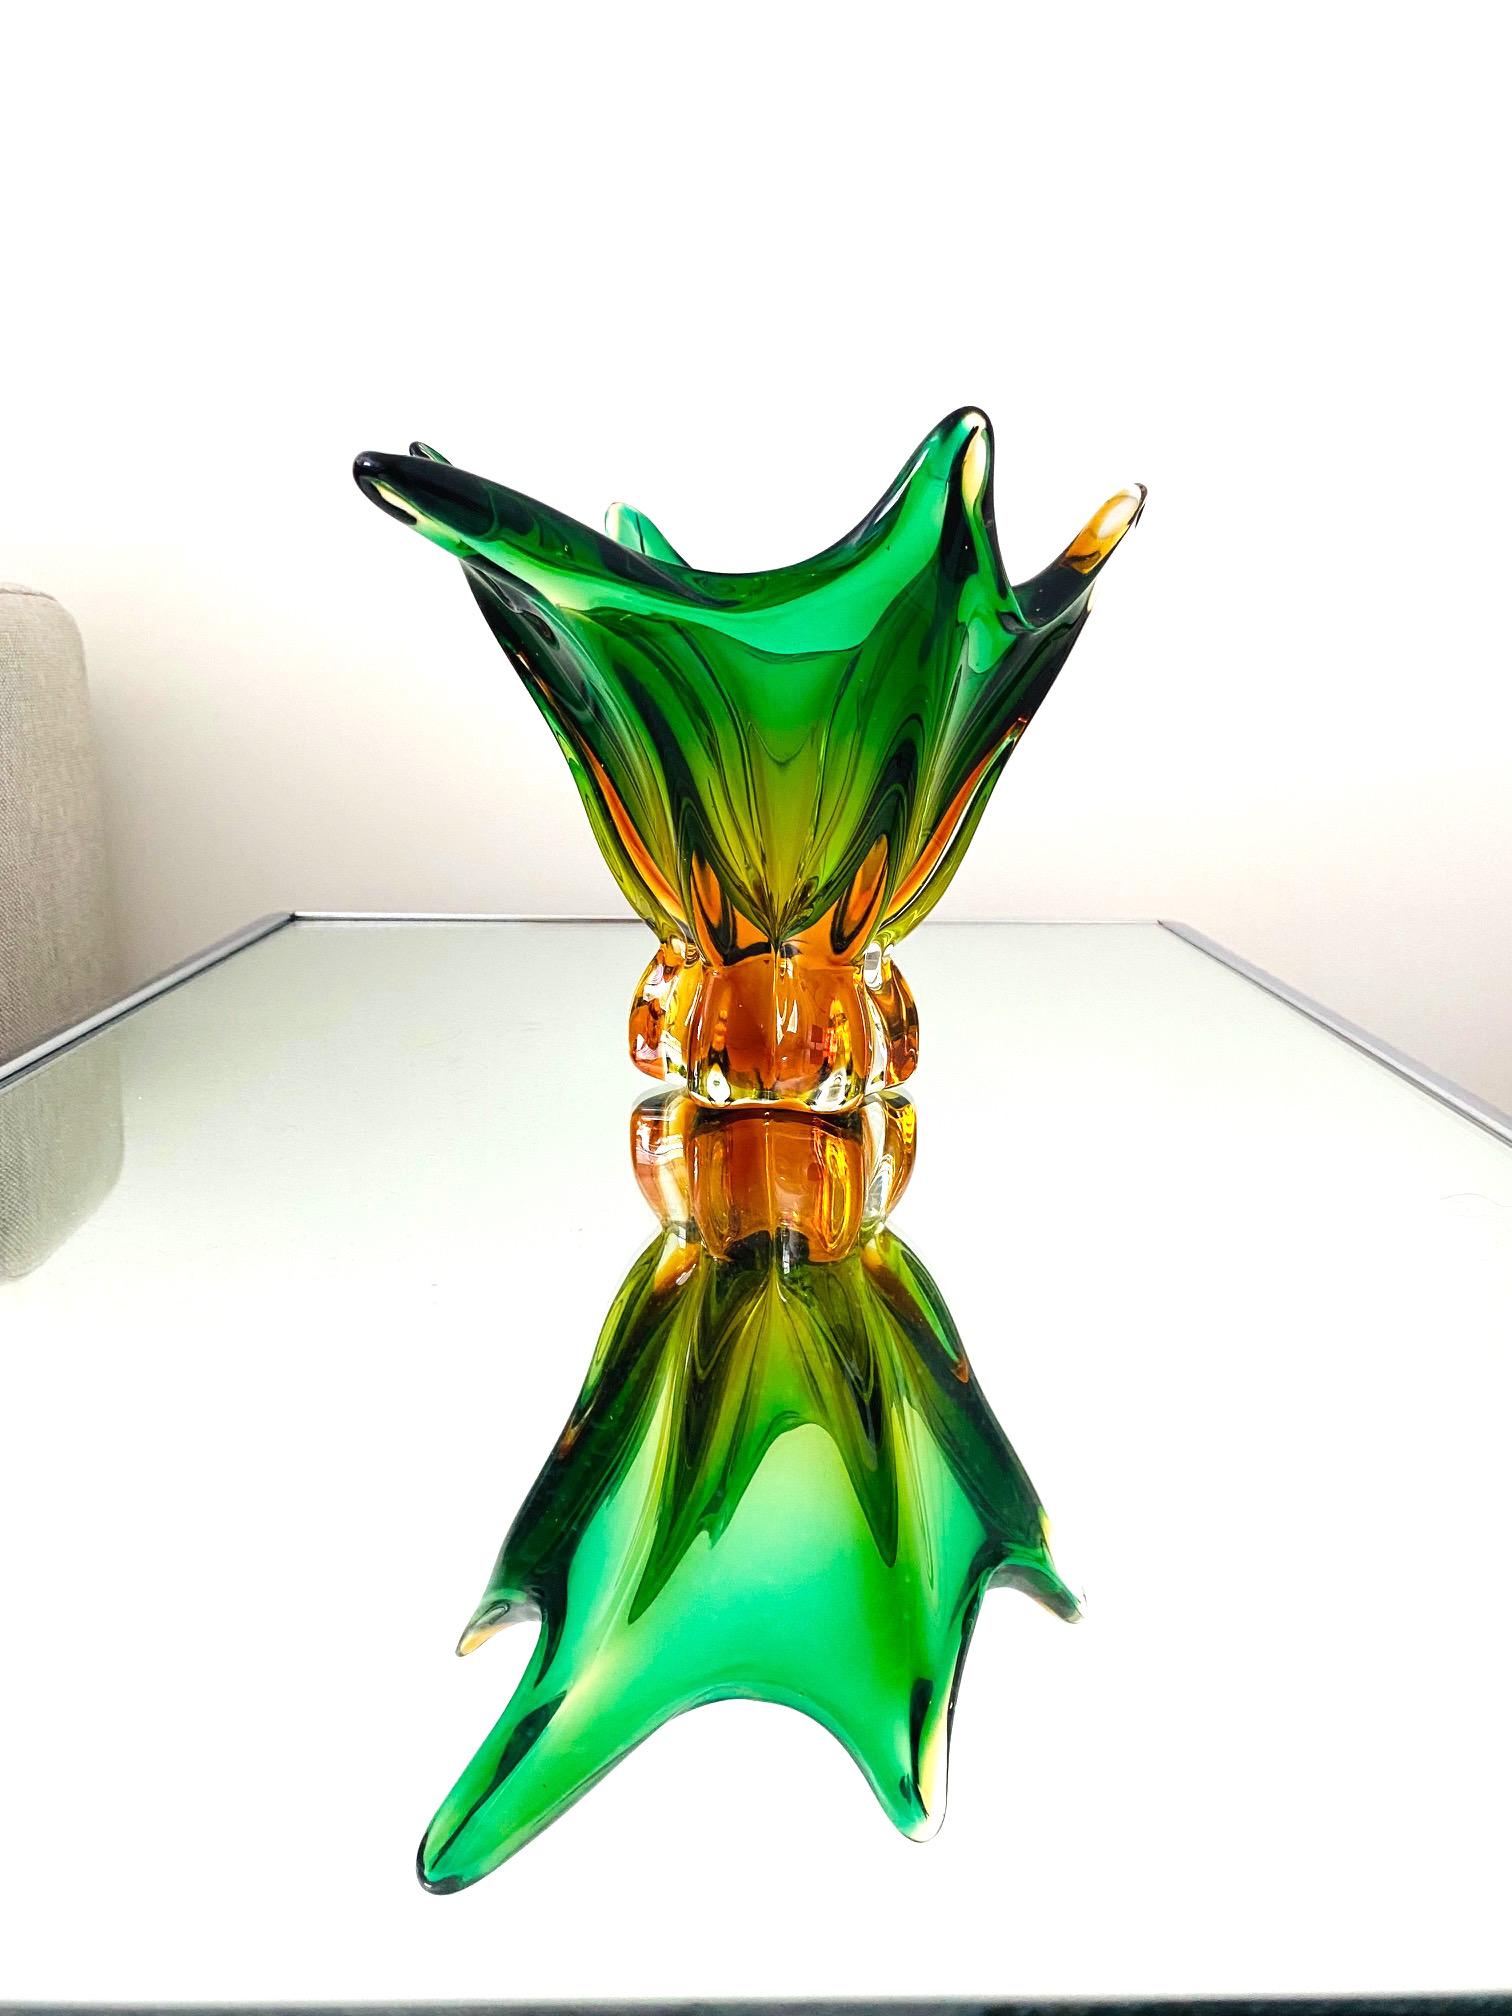 Mid-Century Modern Abstract Murano Sommerso Vase or Bowl in Emerald Green & Orange, Italy, c. 1950